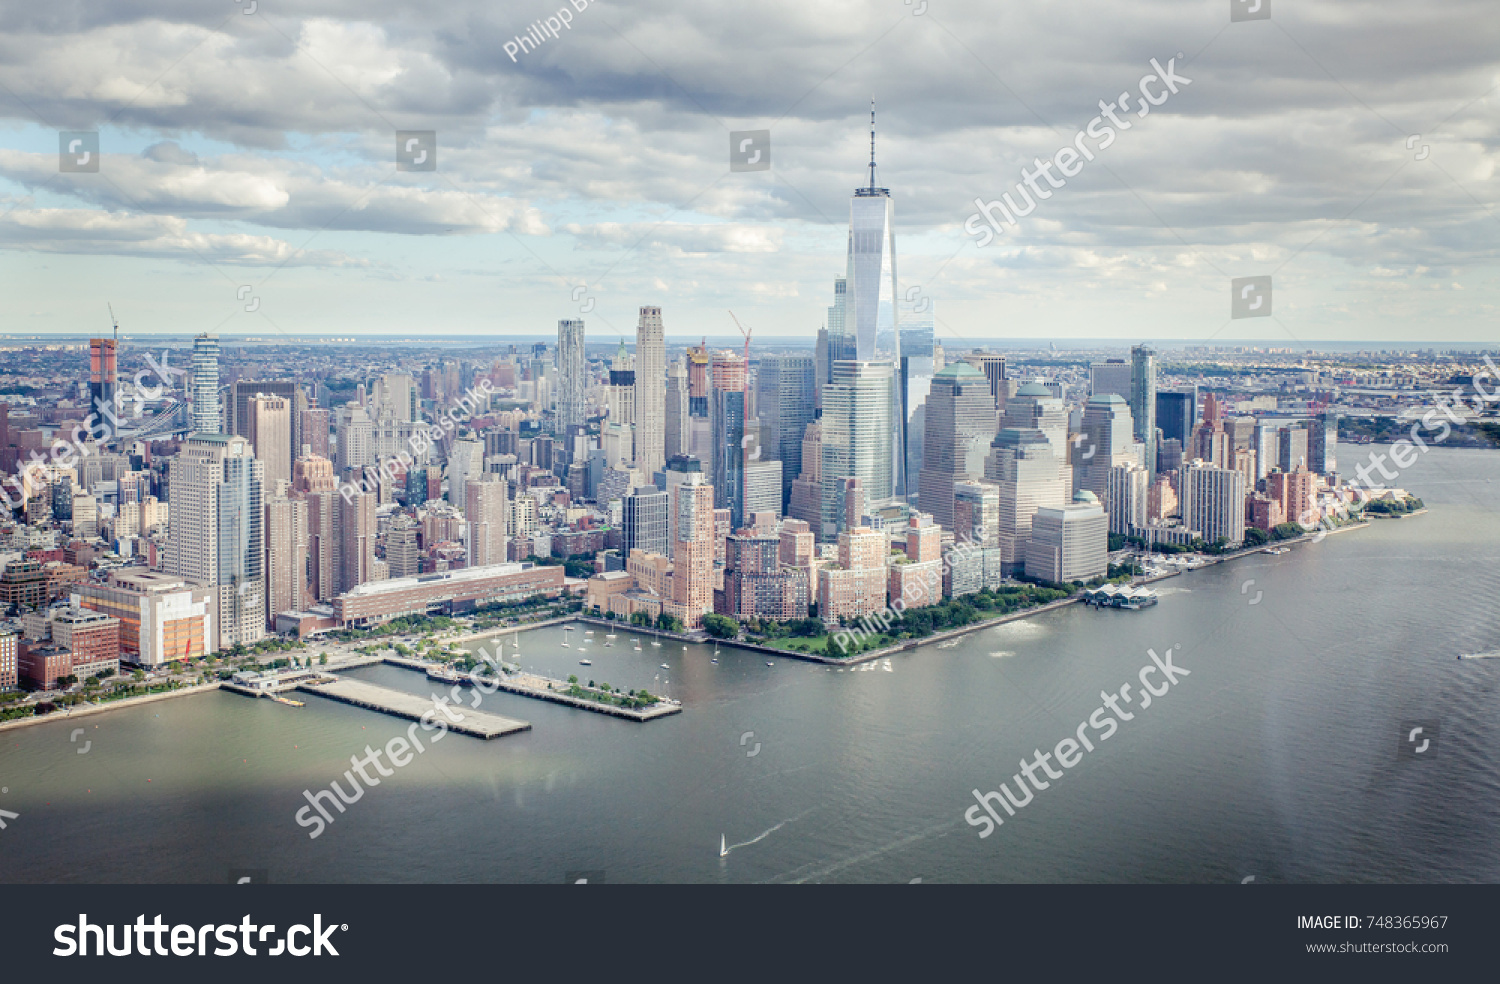 Top view on lower Manhattan from a tourist helicopter view #748365967